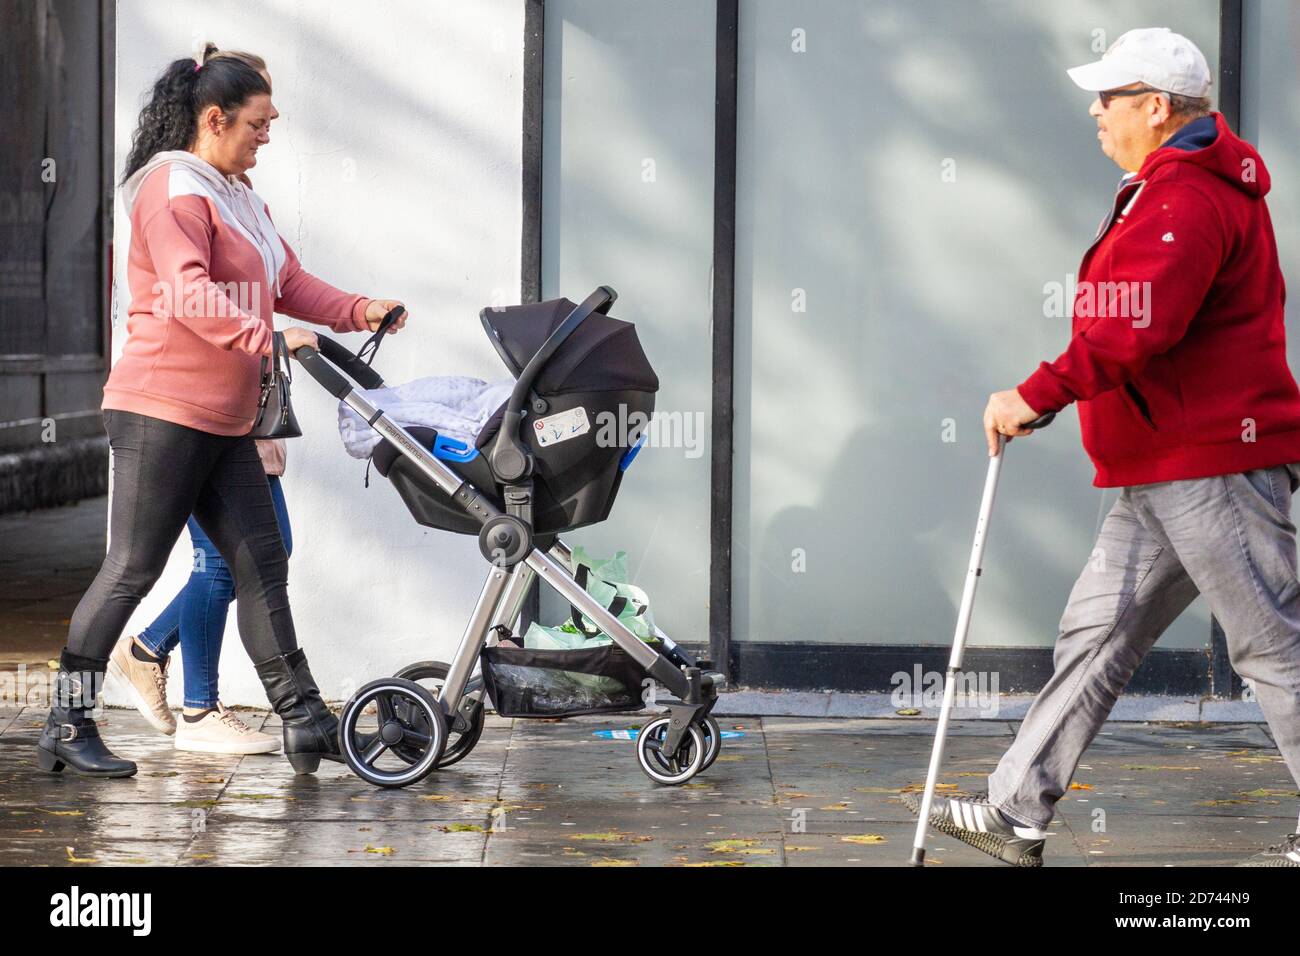 Dundee, Tayside, Scotland, UK. 20th Oct, 2020. UK Weather: A bright day with some sunny spells across North-East Scotland, maximum temperatures 12°C. A single person pushing a baby stroller with her child while shopping in Dundee city centre during the Covid-19 lockdown restrictions. Credit: Dundee Photographics/Alamy Live News Stock Photo